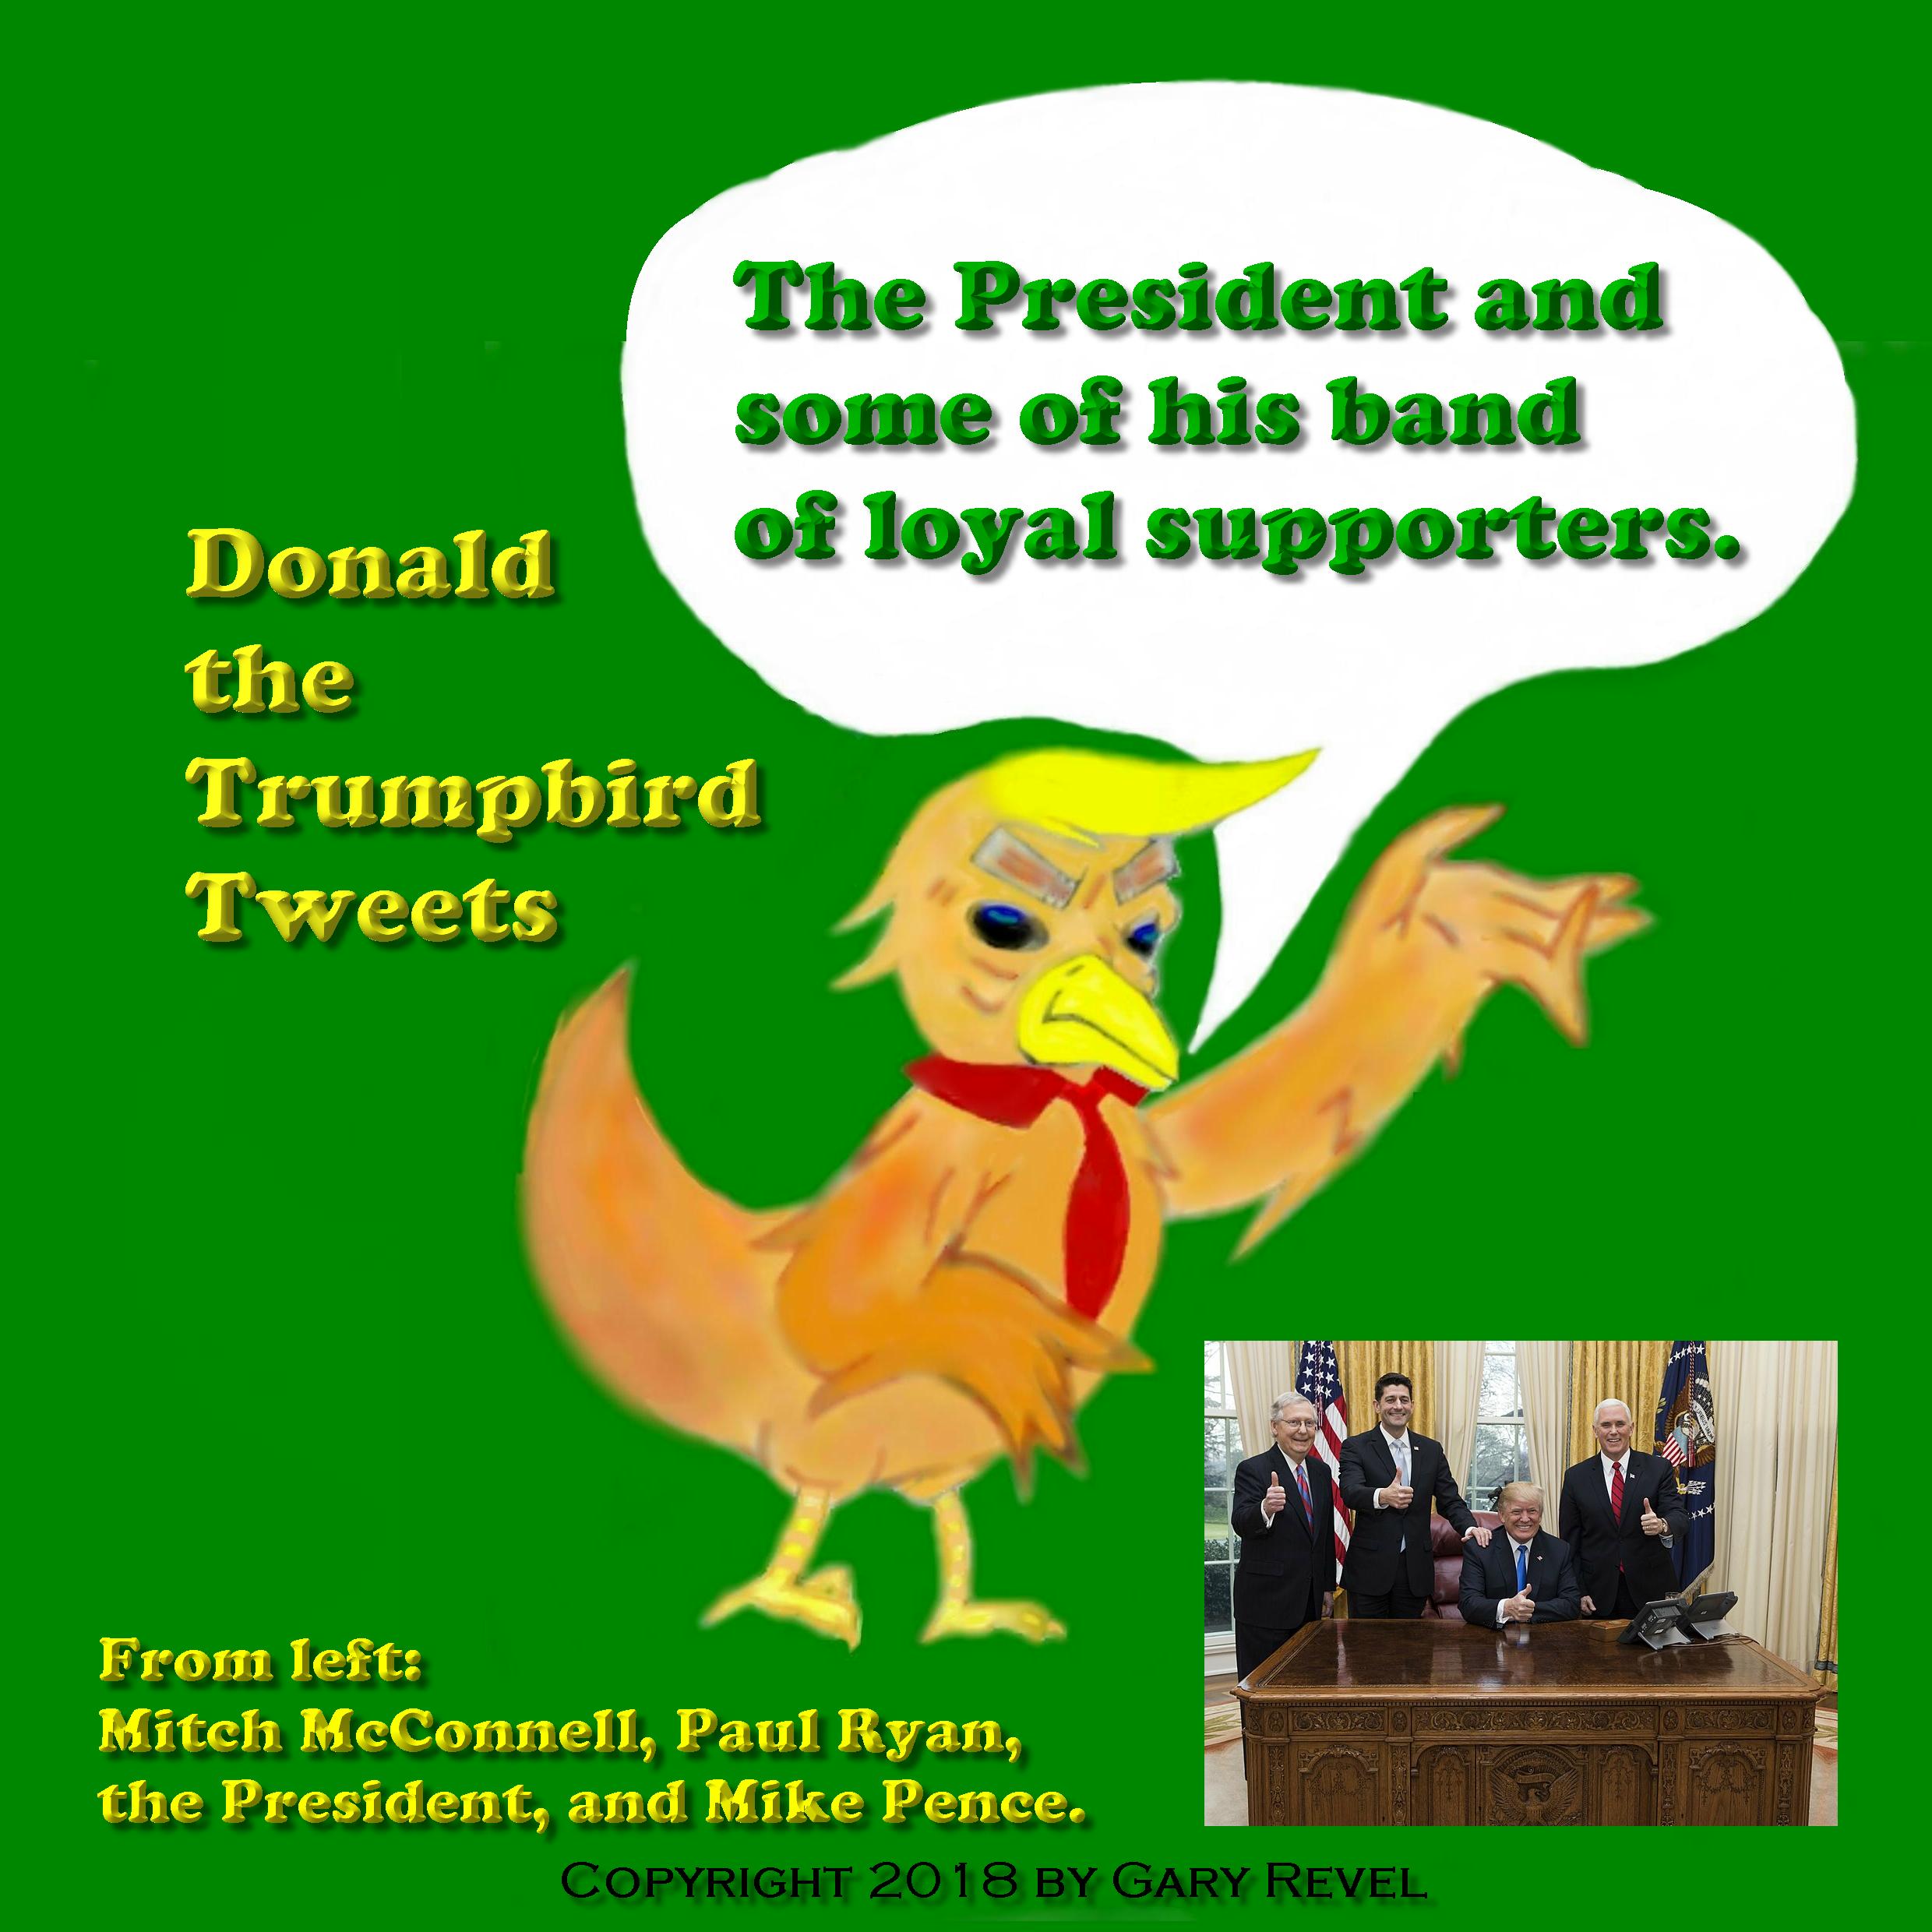 Donald the Trumpbird tweets pence, ryan, mcconnell